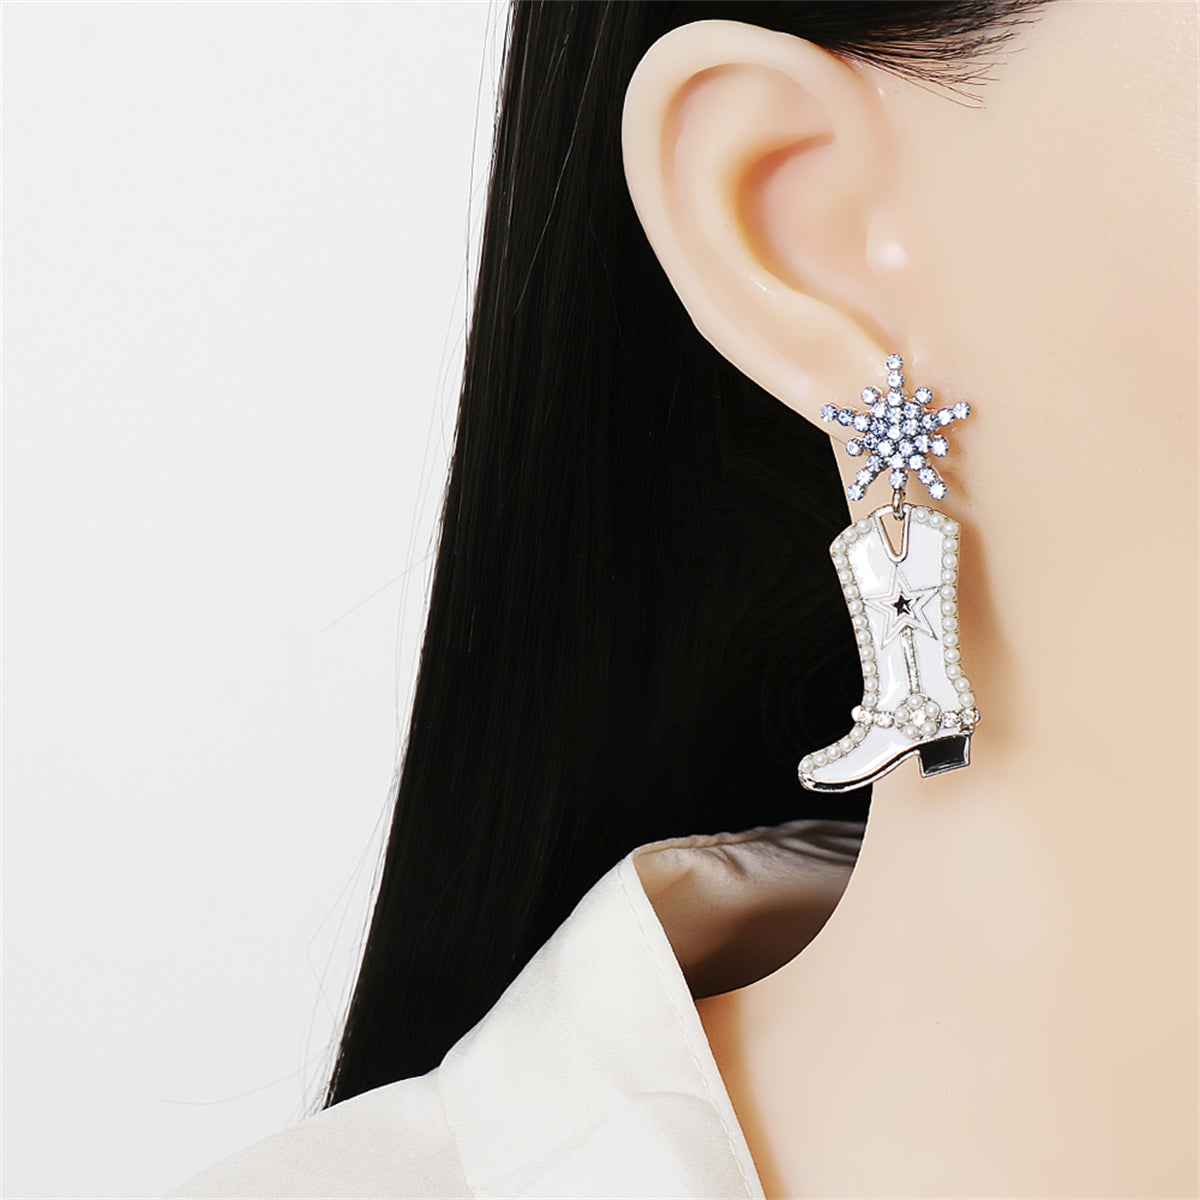 Blue Cubic Zirconia & Pearl Silver-Plated Cowboy Boot Drop Earrings